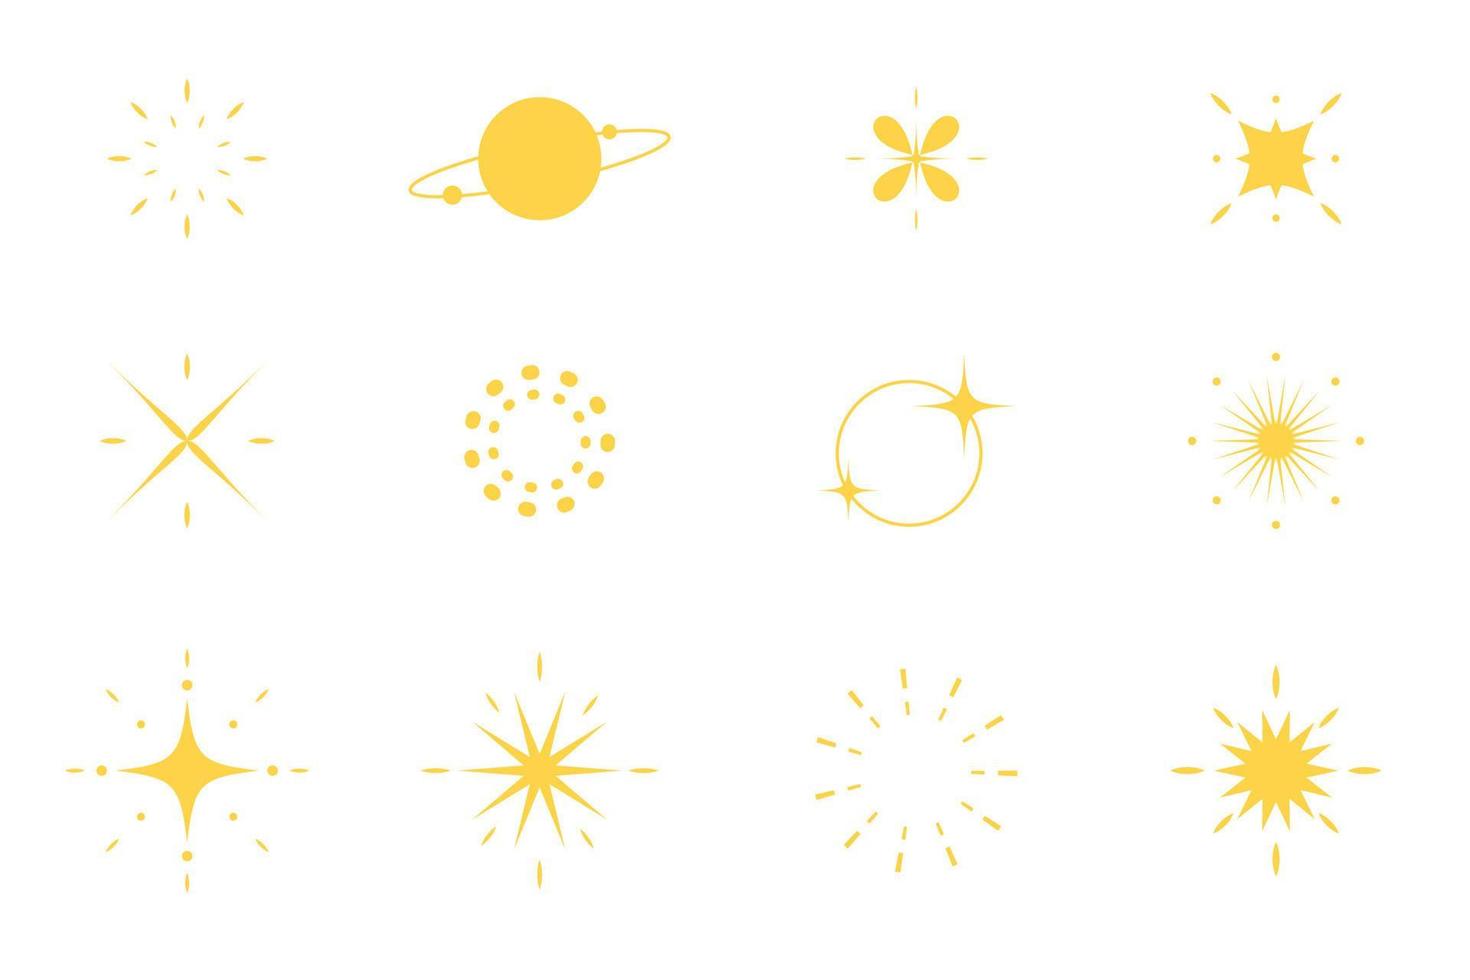 Set of sparking star. Icon and symbol. Starry vector illustration isolated on white background